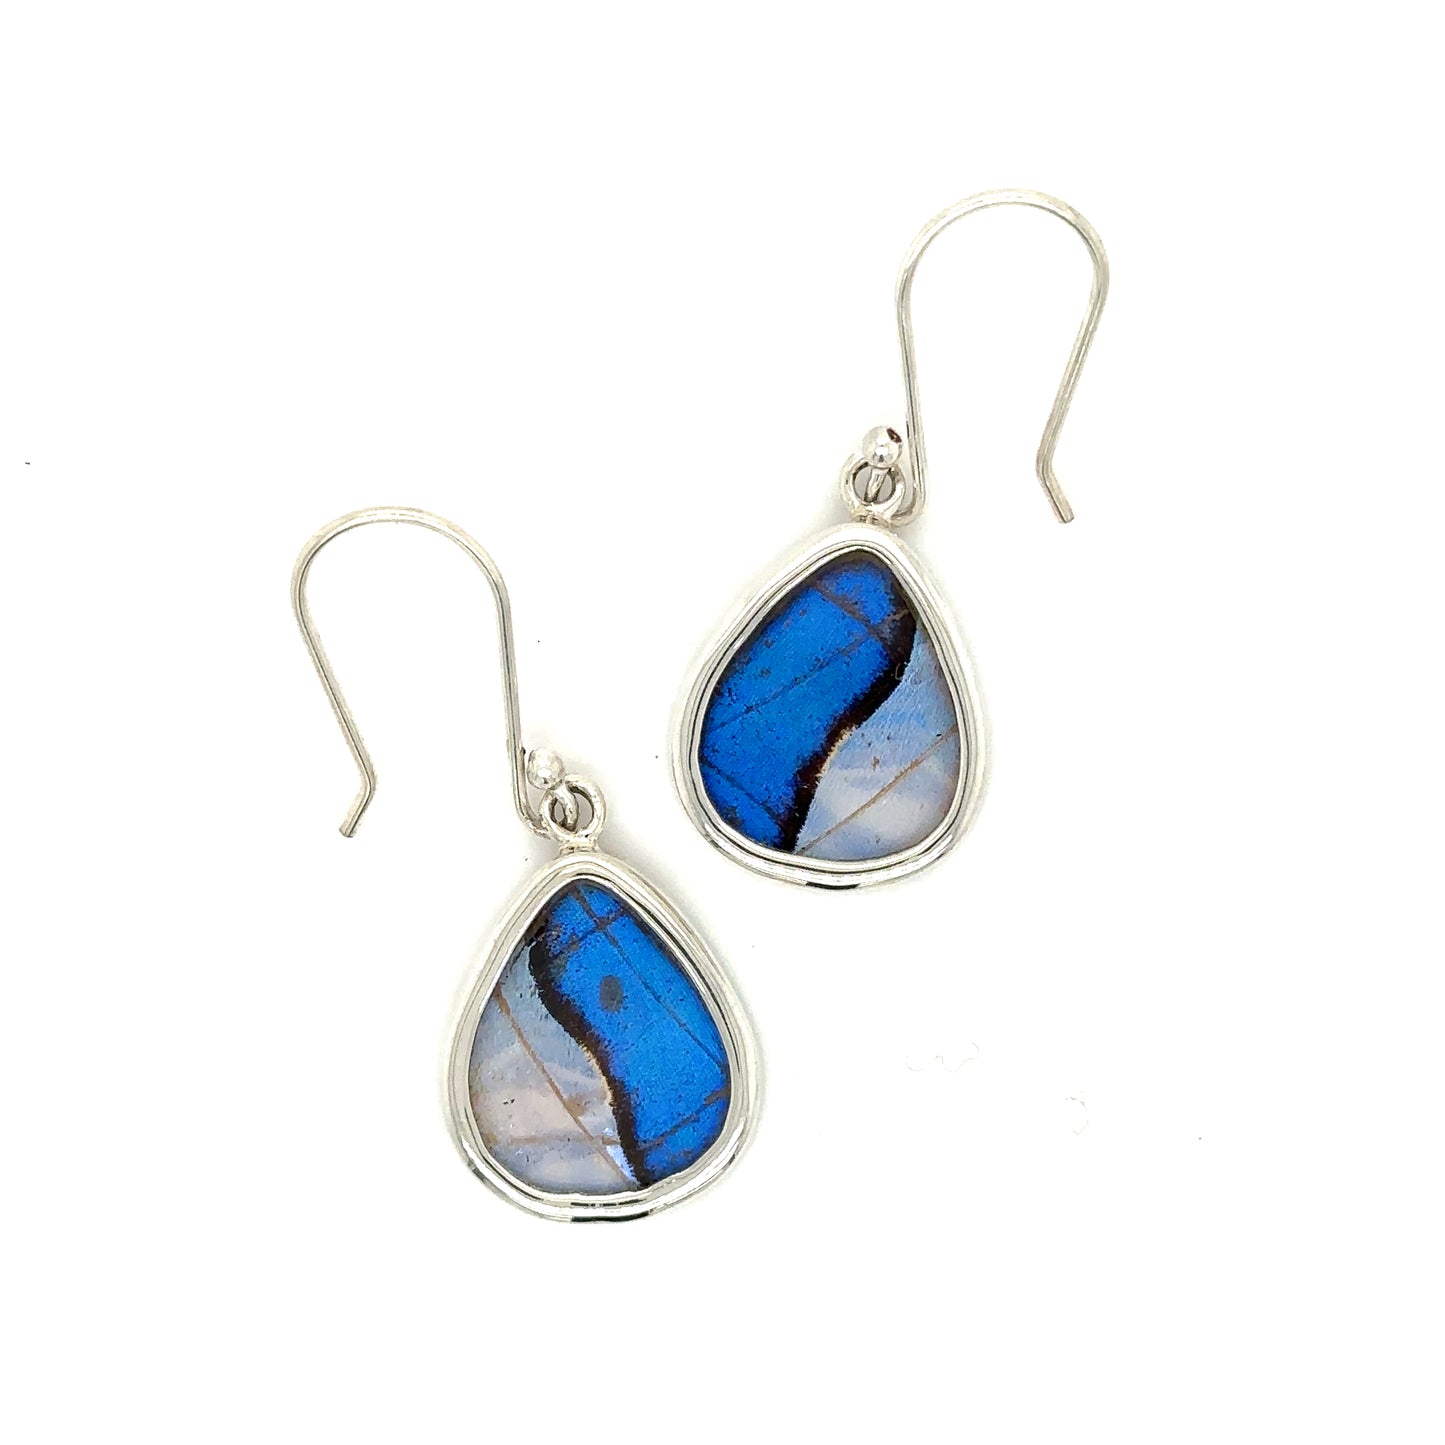 A pair of Genuine Butterfly Wing Teardrop Earrings with colorful stones.